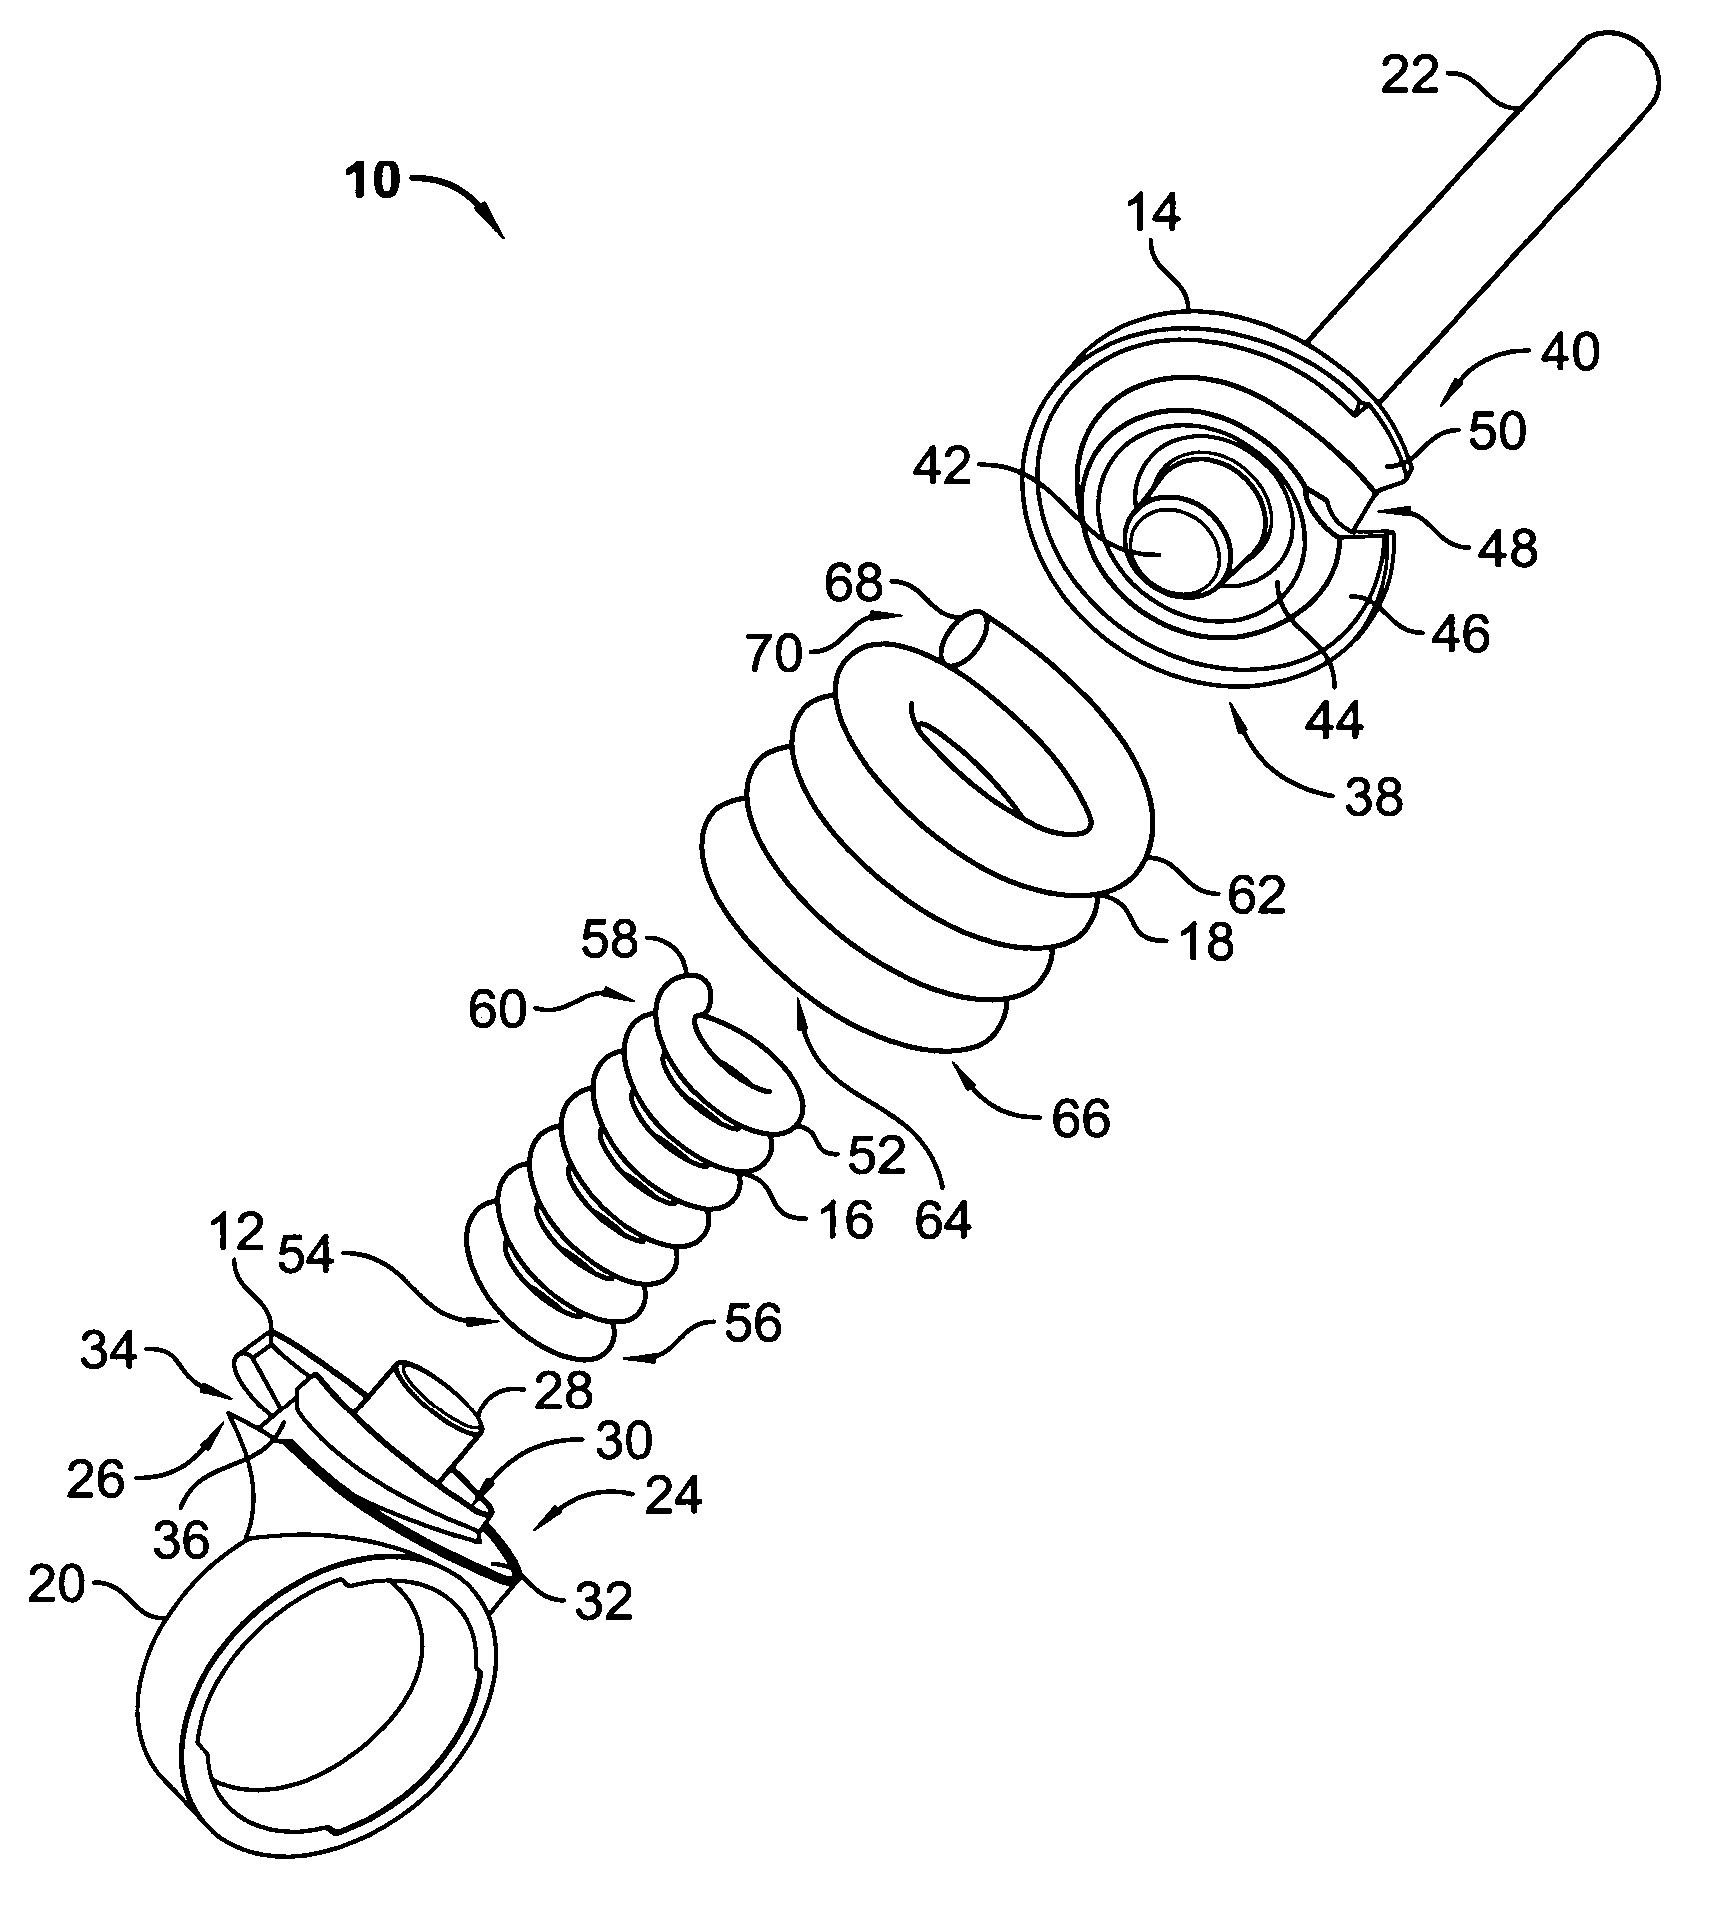 Spring junction and assembly methods for spinal device